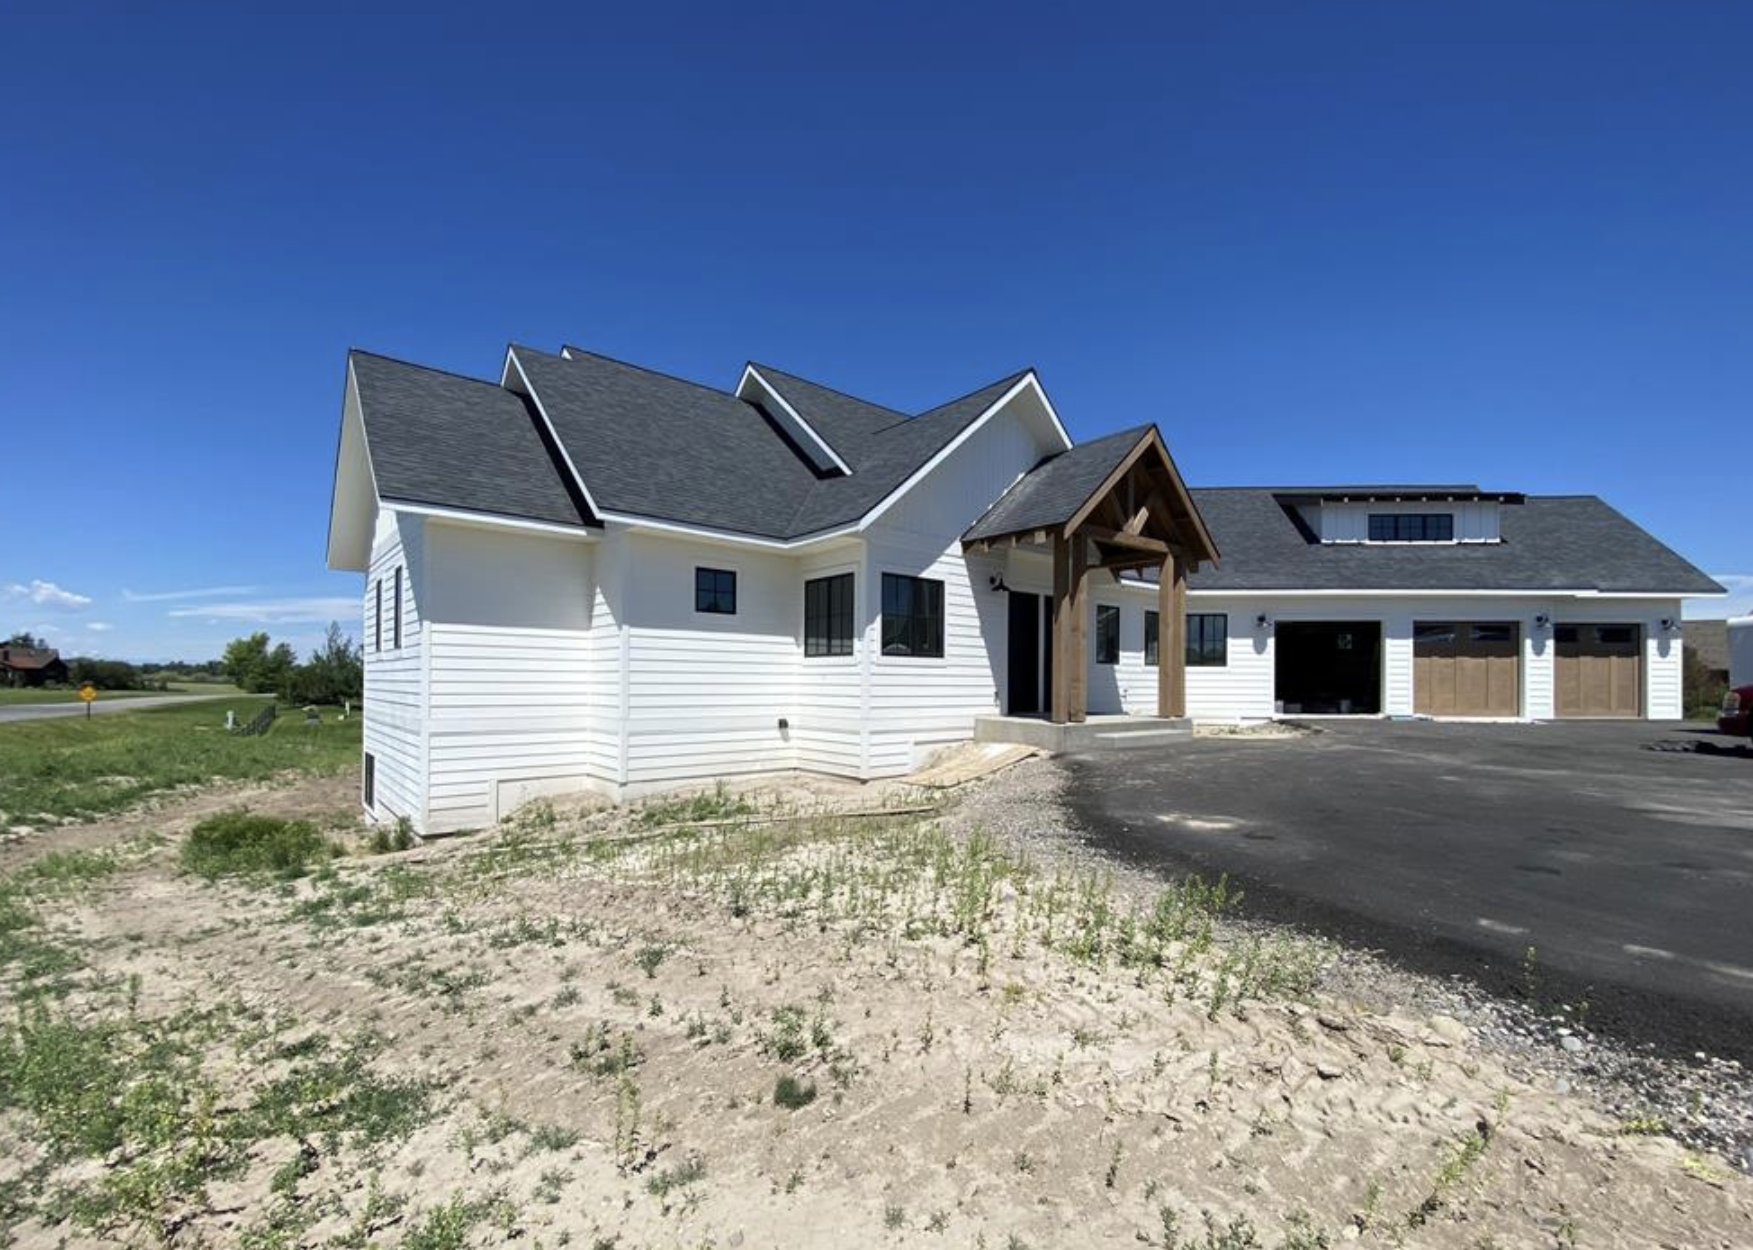 Home for Sale in Bozeman Montana